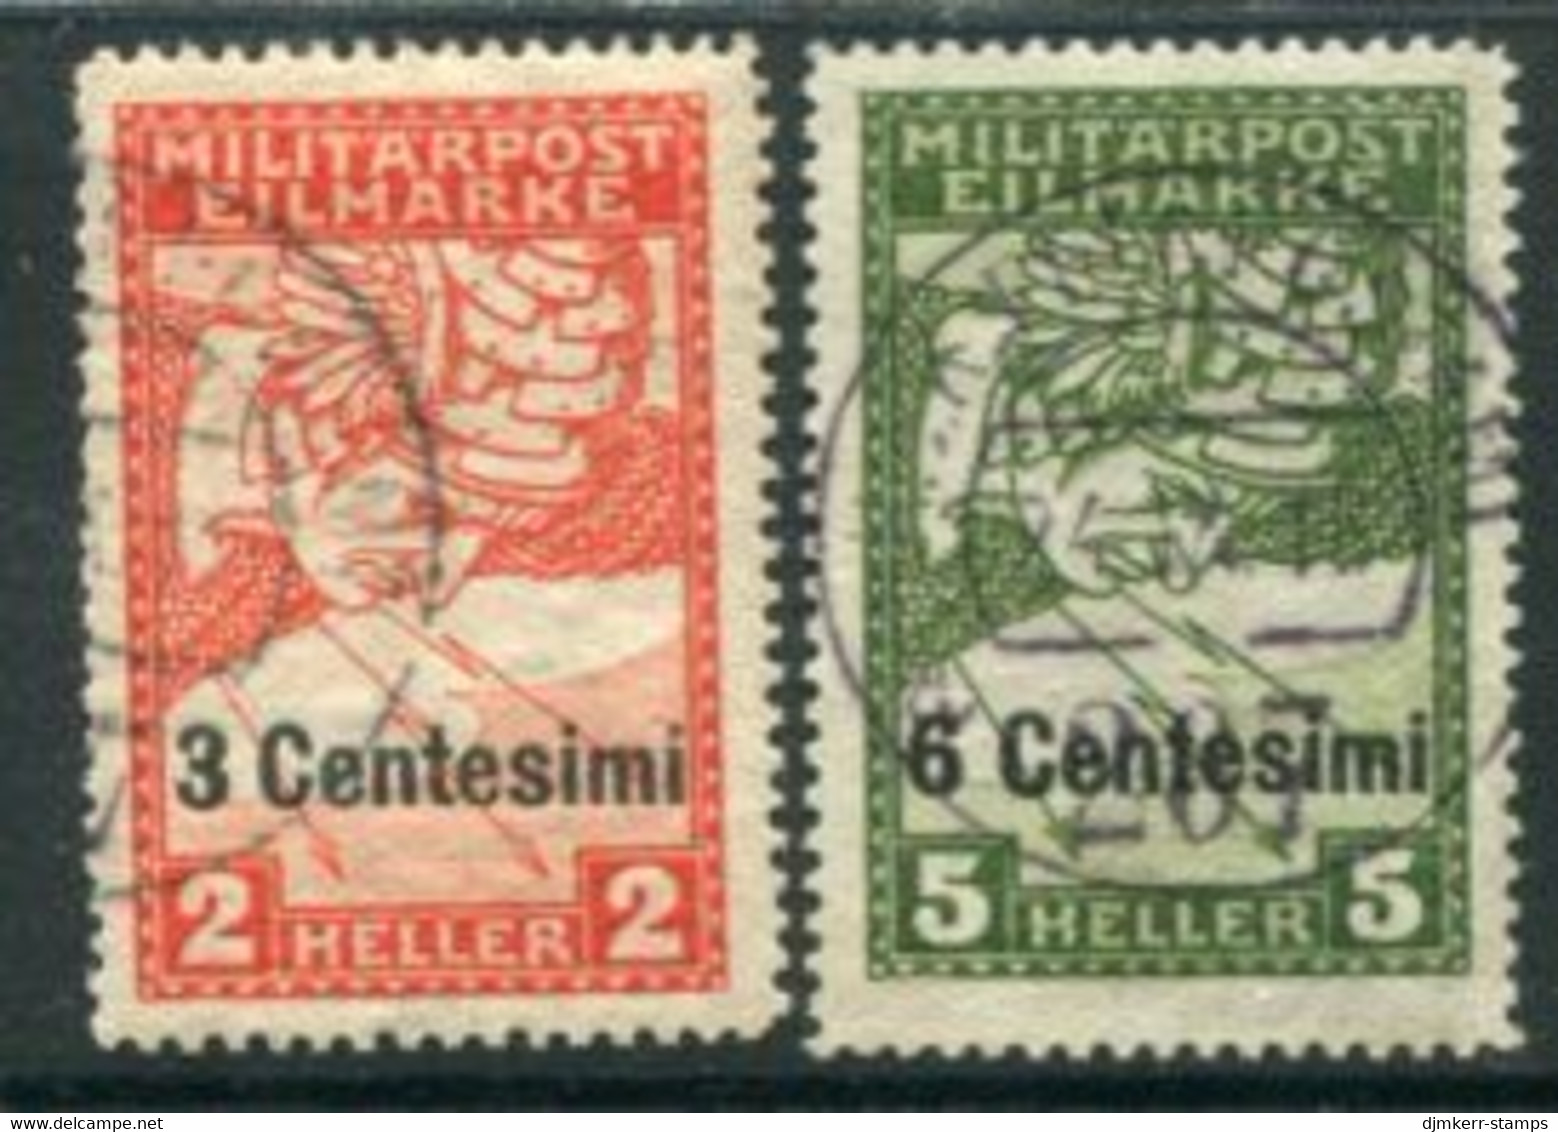 AUSTRIAN FELDPOST In ITALY 1917 Overprint On Newspaper Express Stamps. Used.  Michel 24-25 - Used Stamps